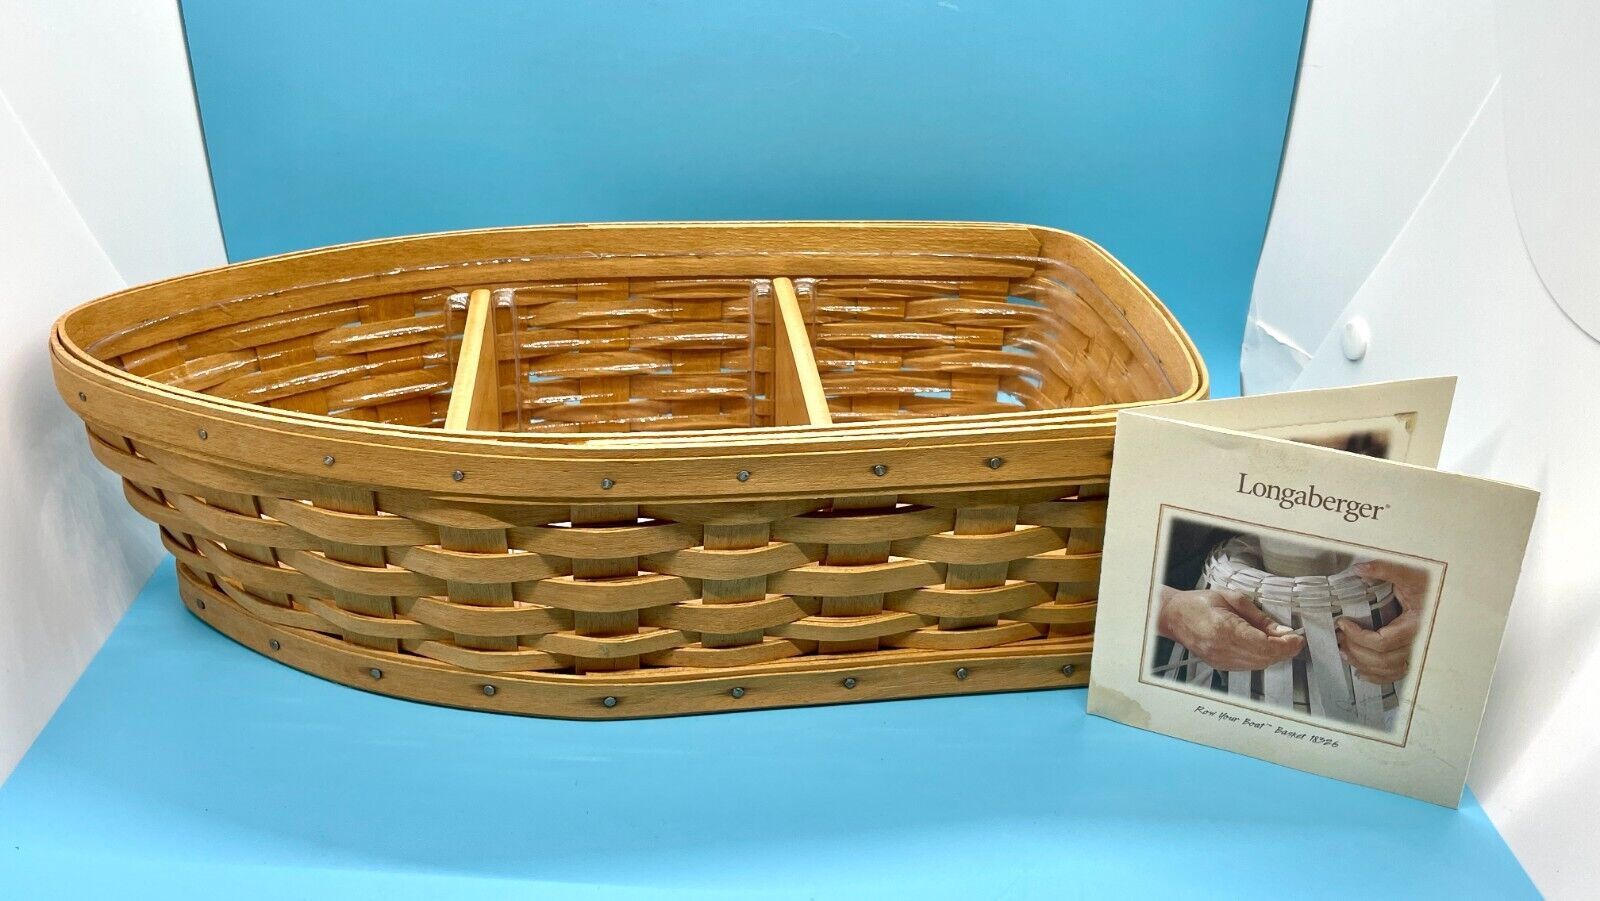 Longaberger “Row Your Boat” Basket w/ 2 Dividers & Plastic Protector – Very Nice